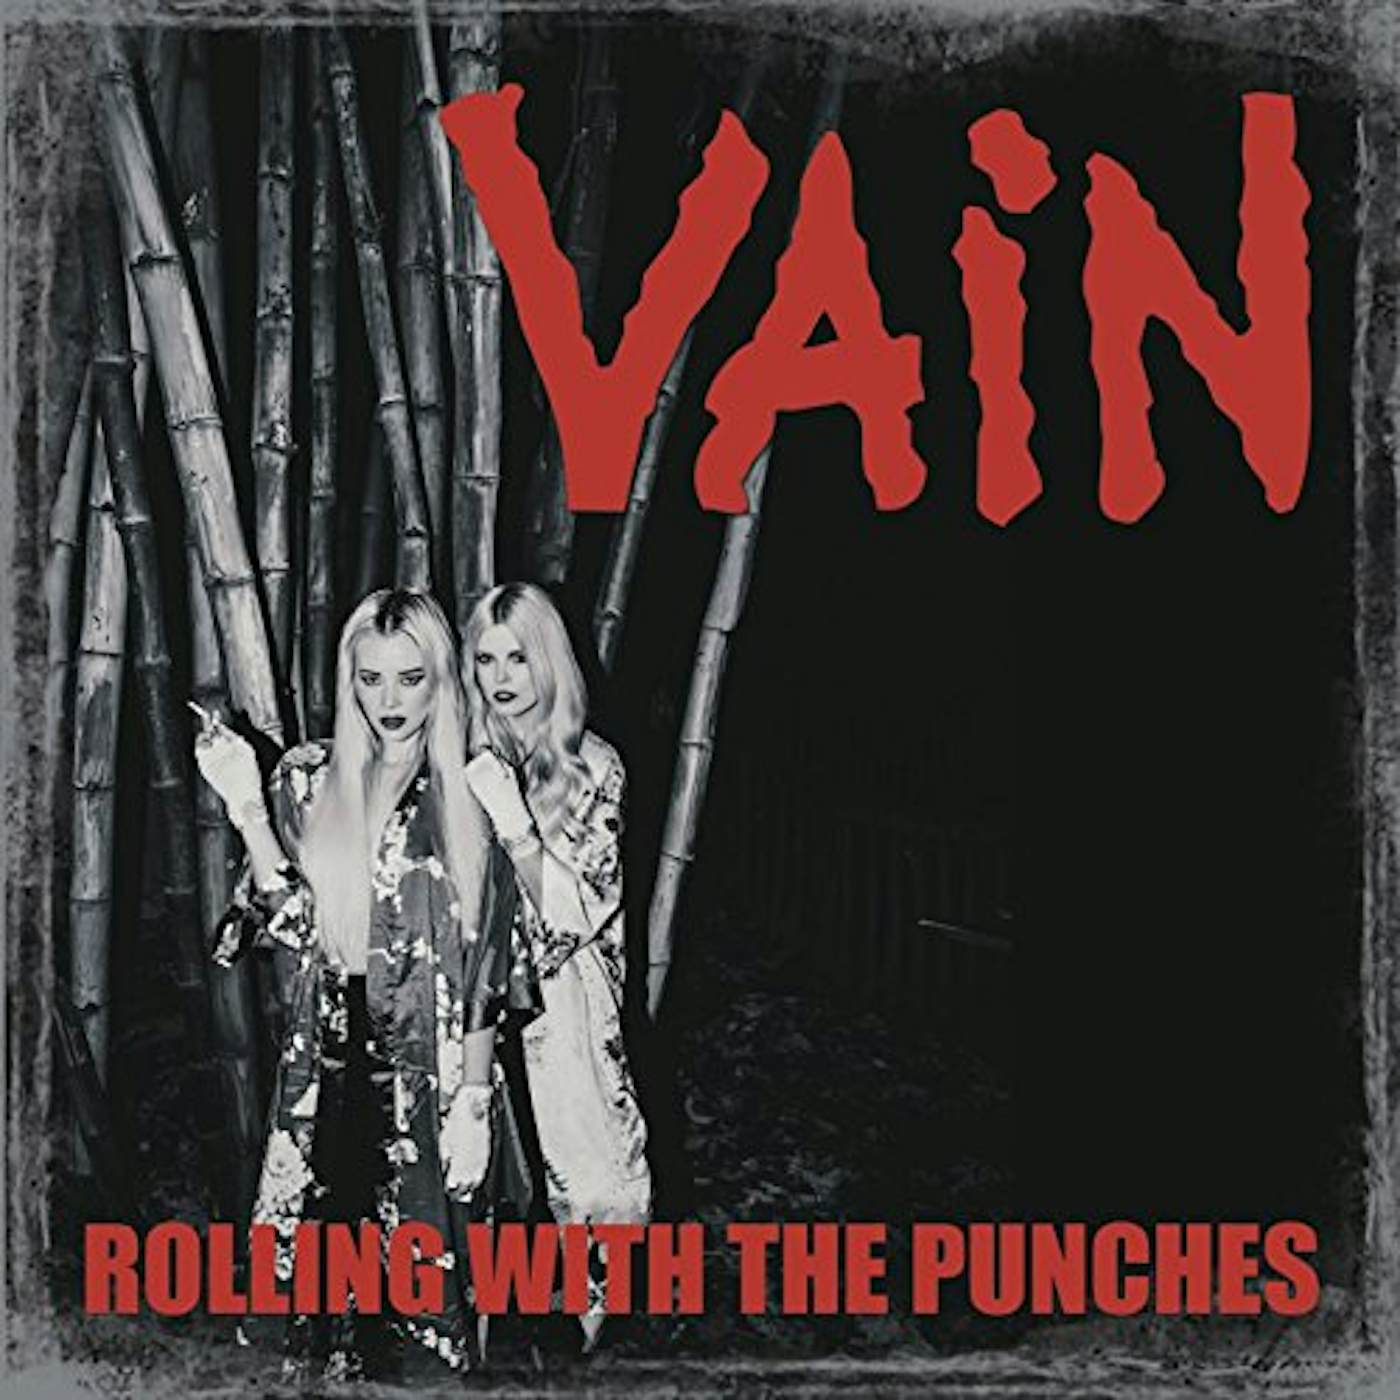 Vain ROLLING WITH THE PUNCHES Vinyl Record